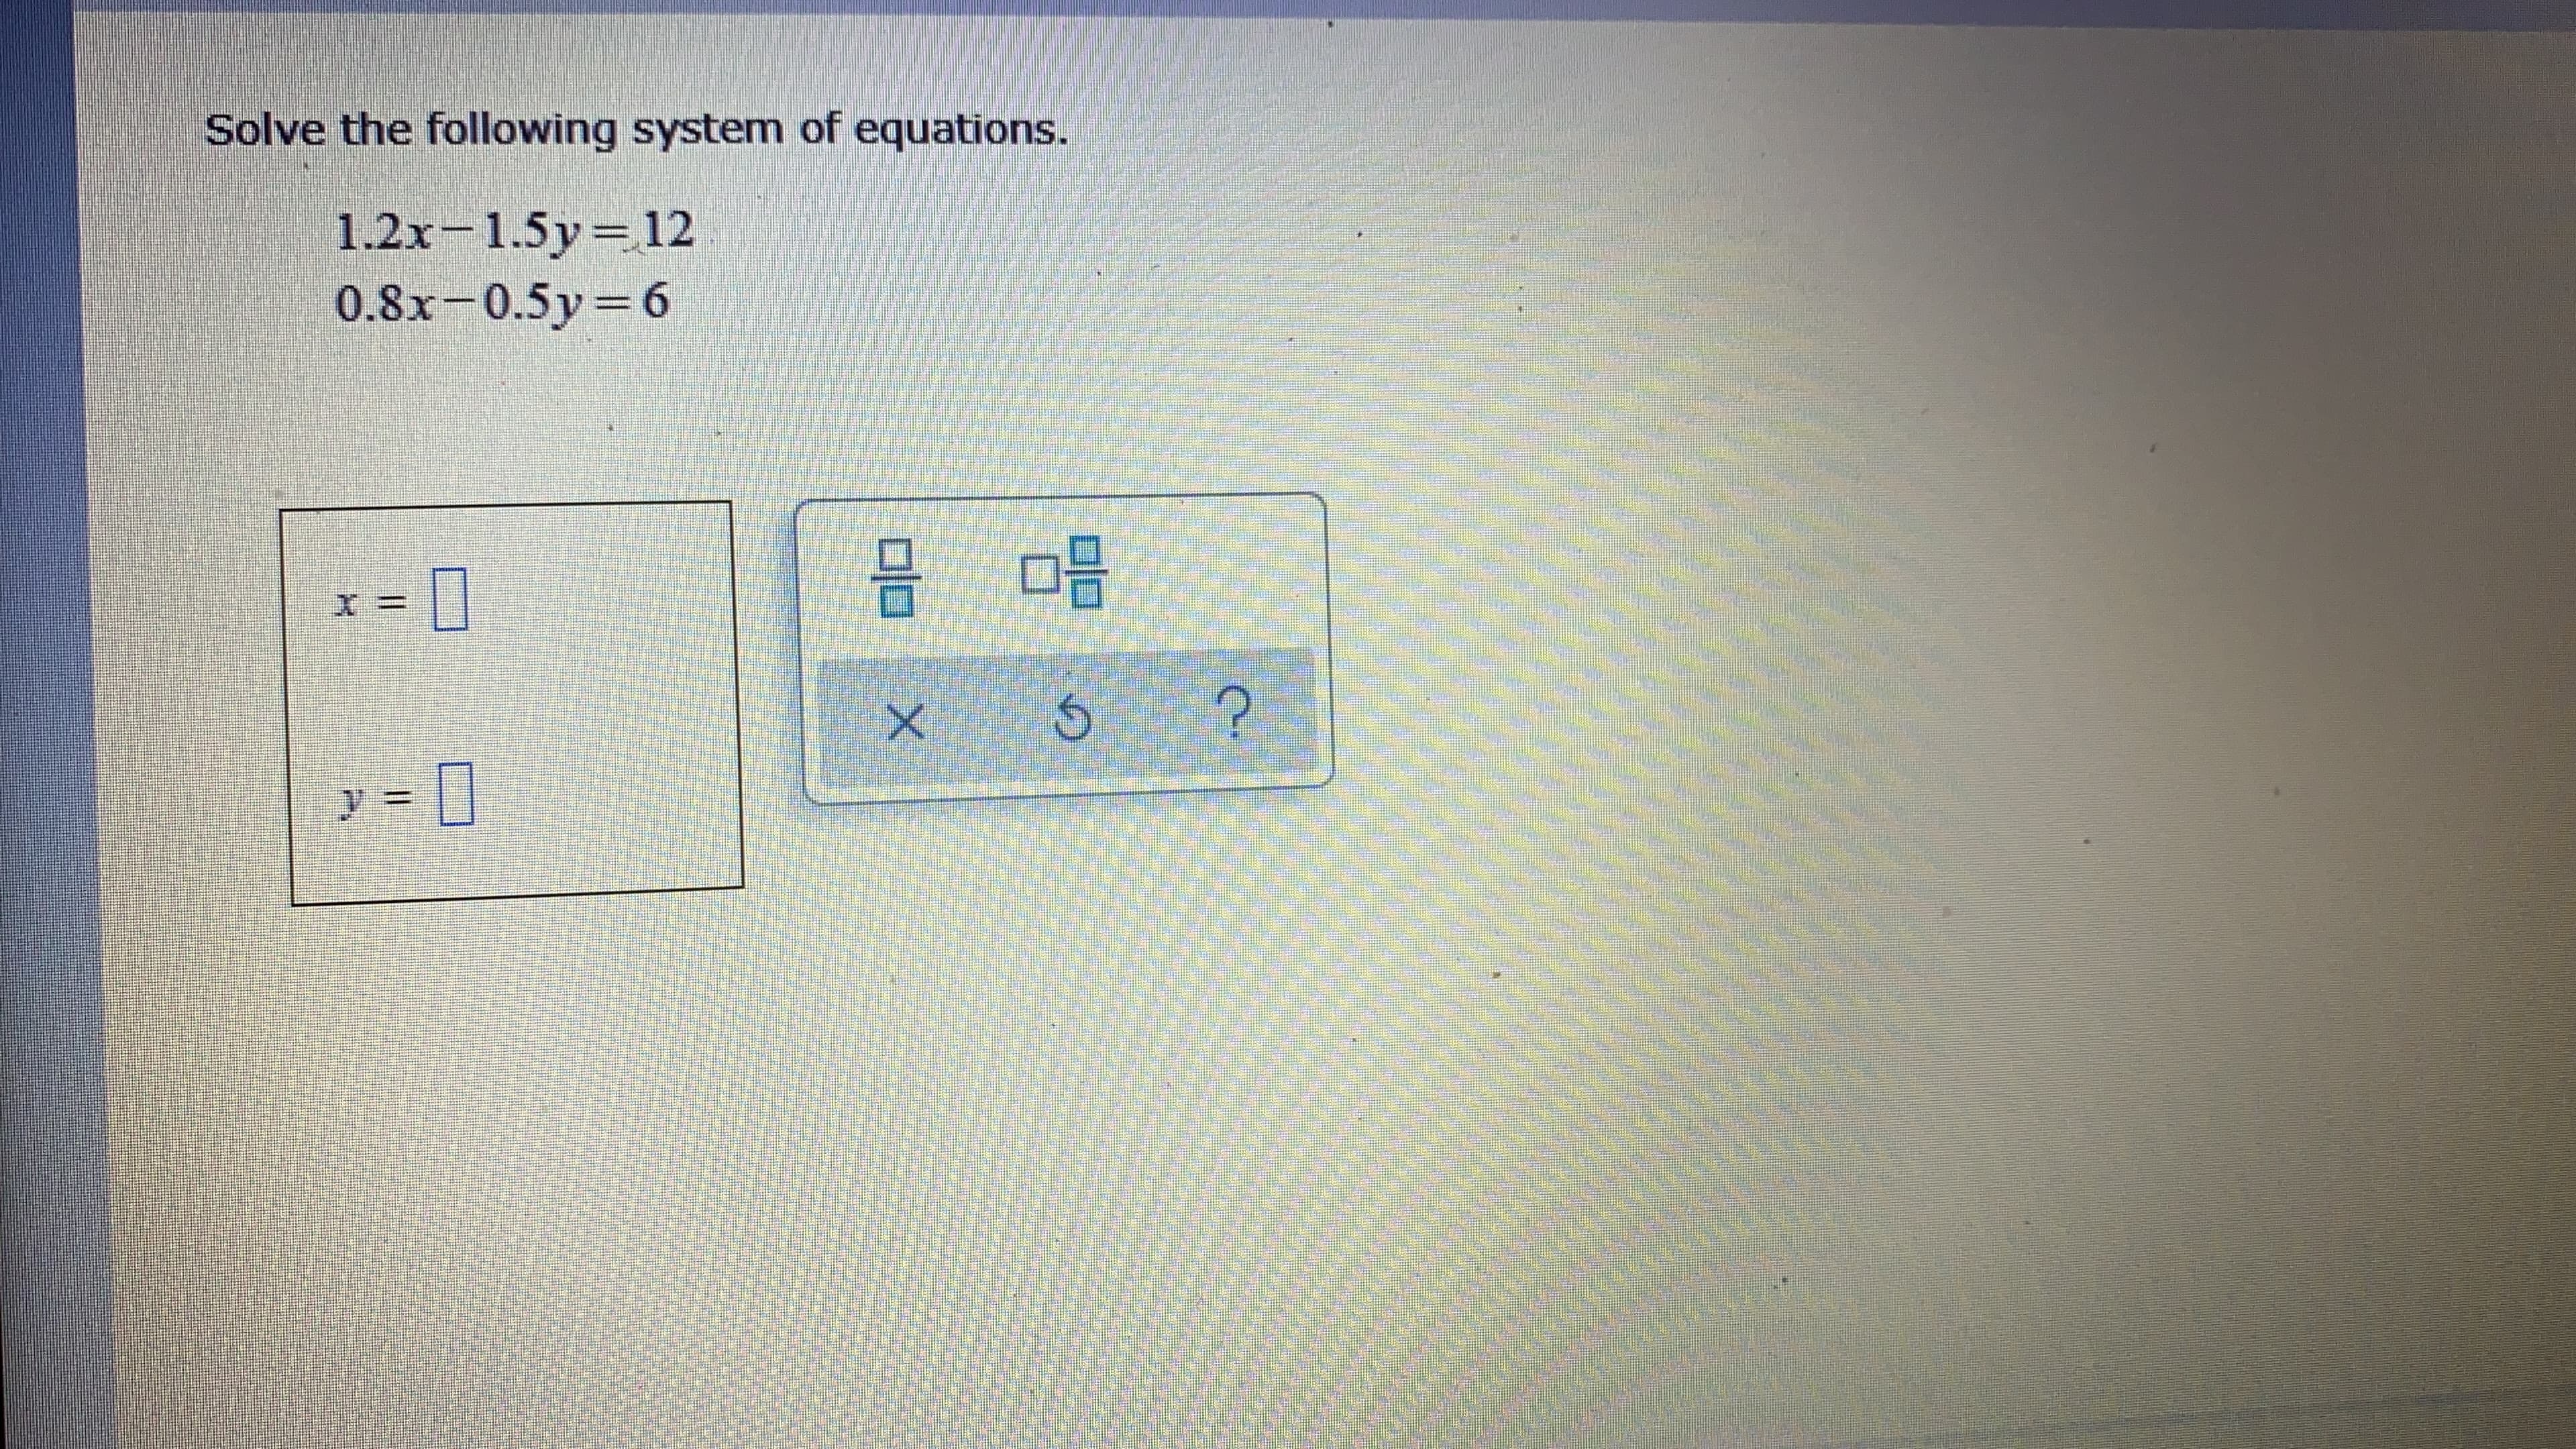 Solve the following system of equations.
1.2x-1.5y= 12
0.8x-0.5y=6
